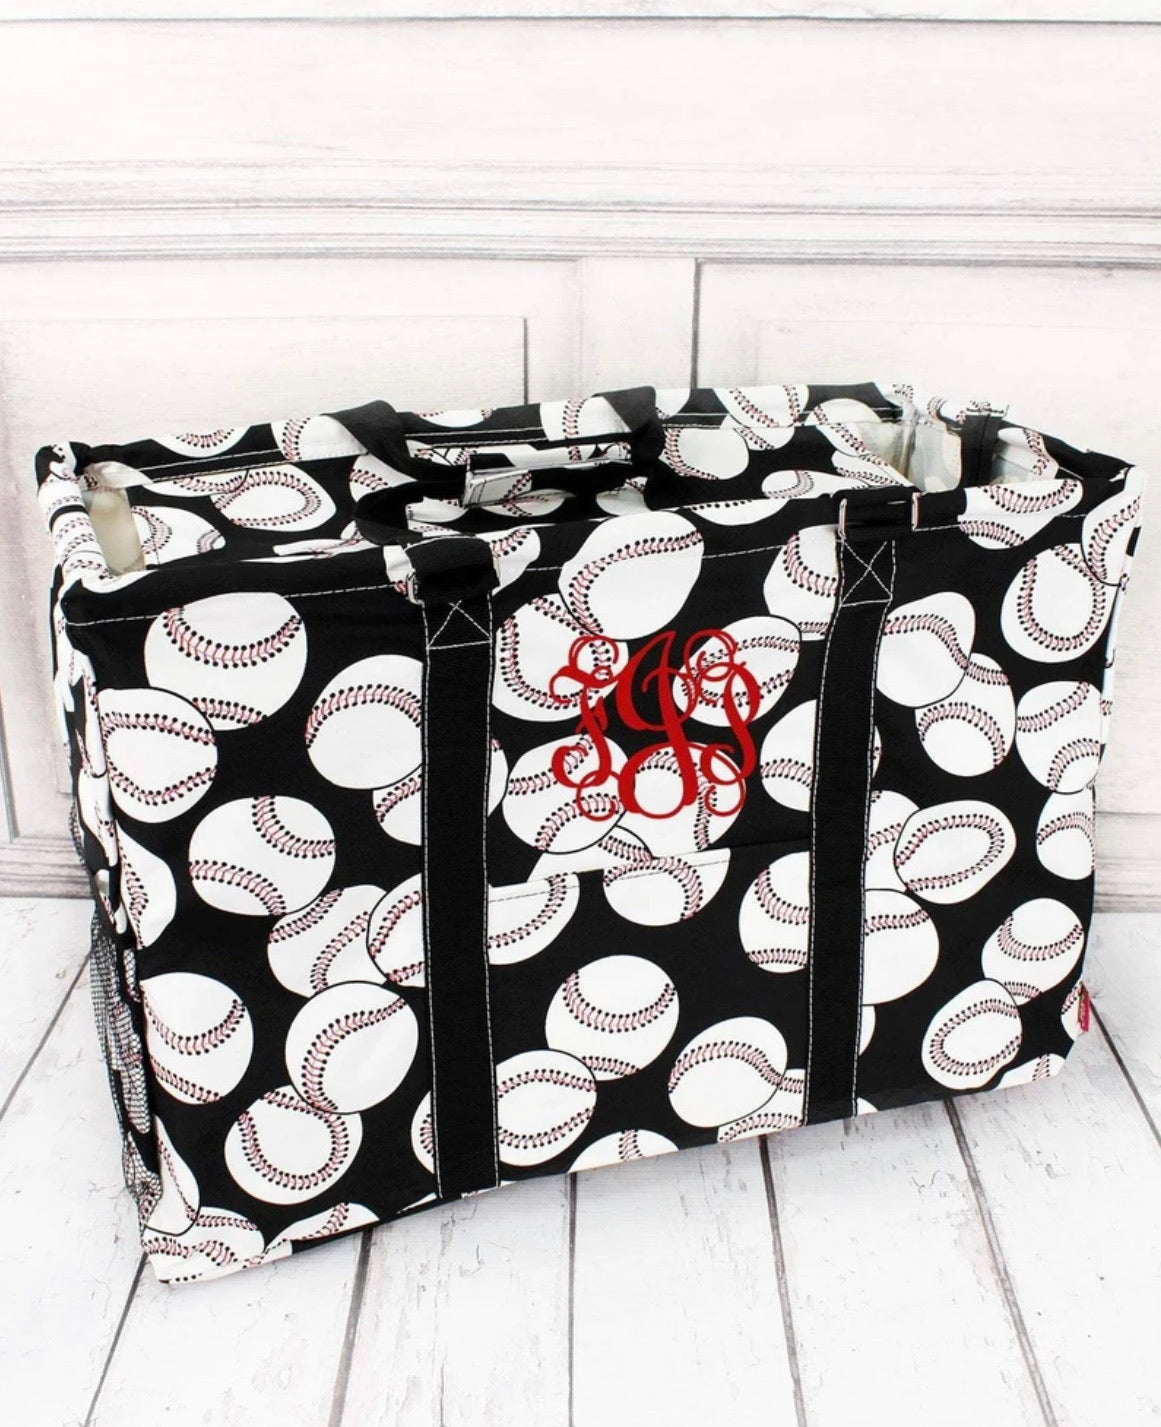 Black Mesh - Mesh Large Utility Tote - Thirty-One Gifts